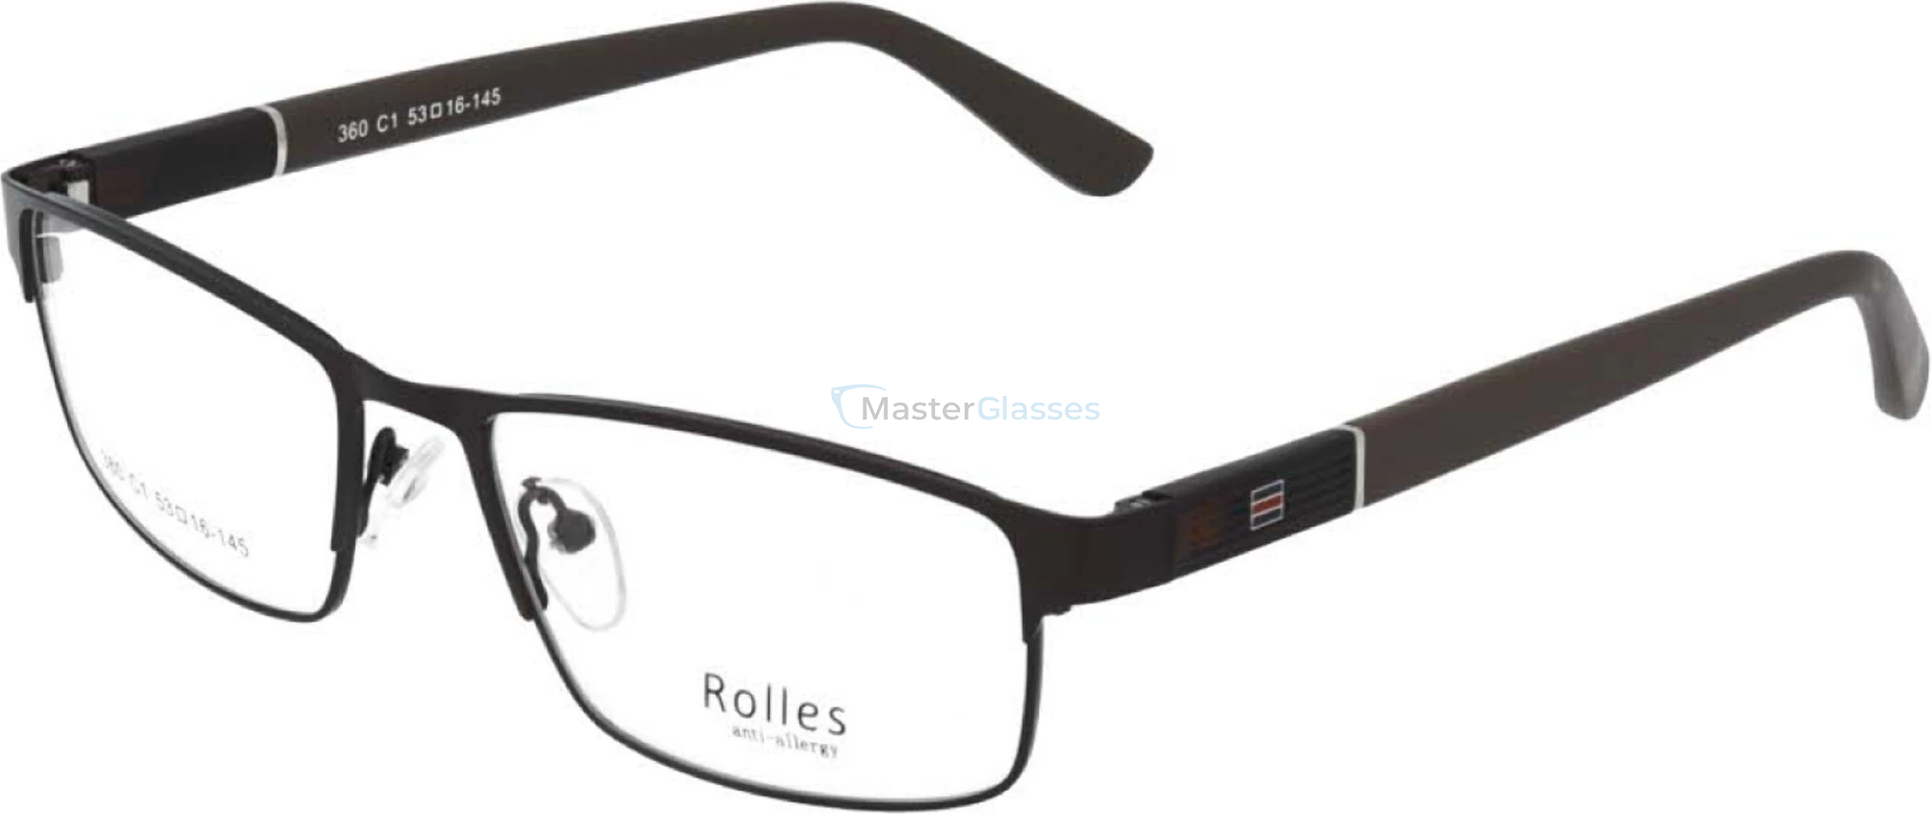  Rolles 360 01